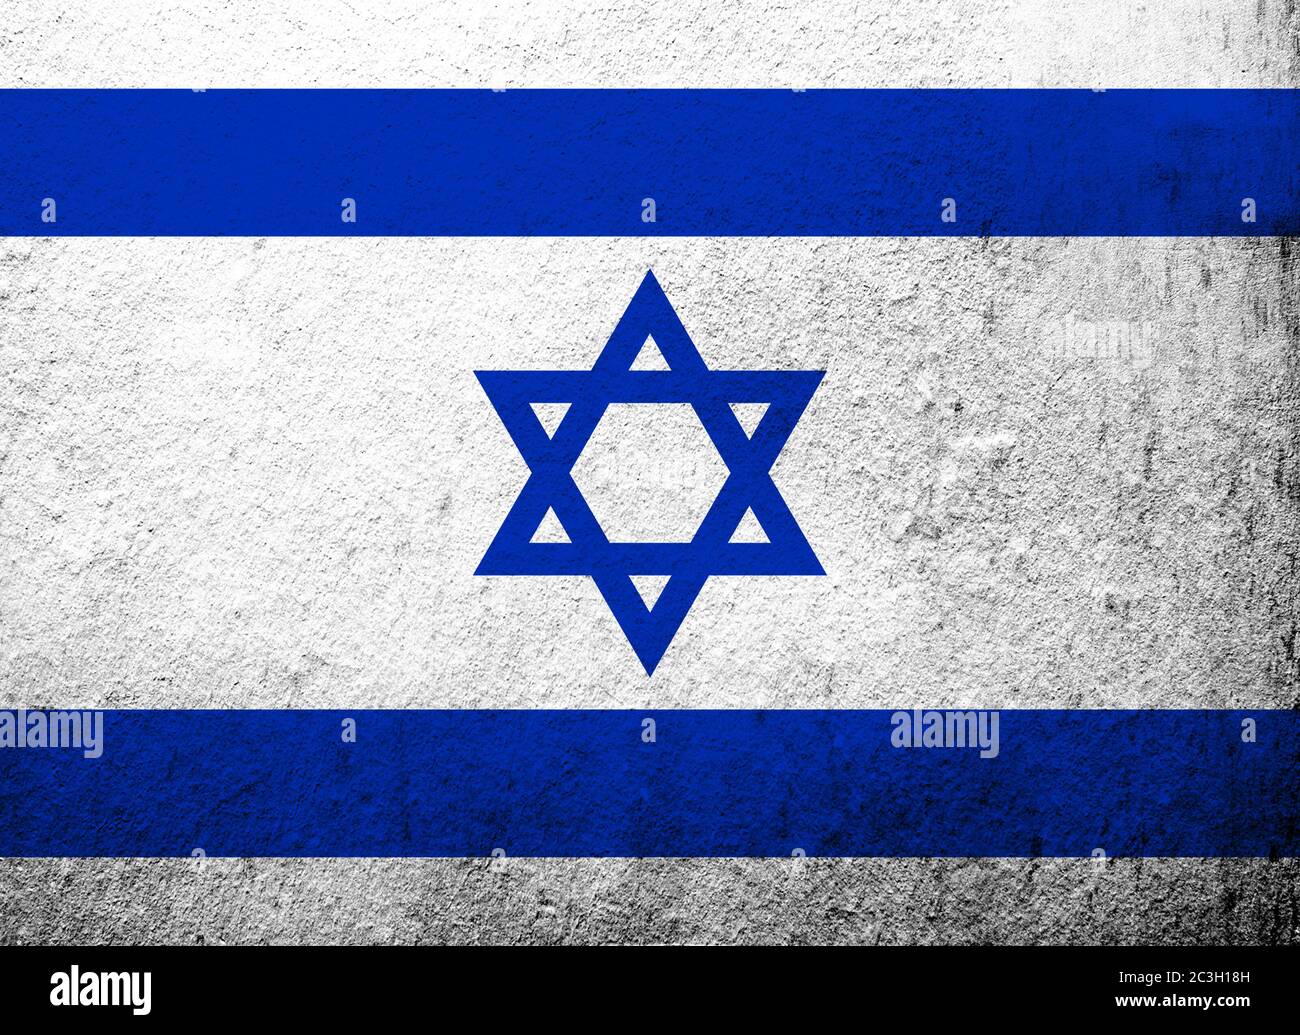 State of Israel National flag (with Star of David). Grunge background Stock Photo